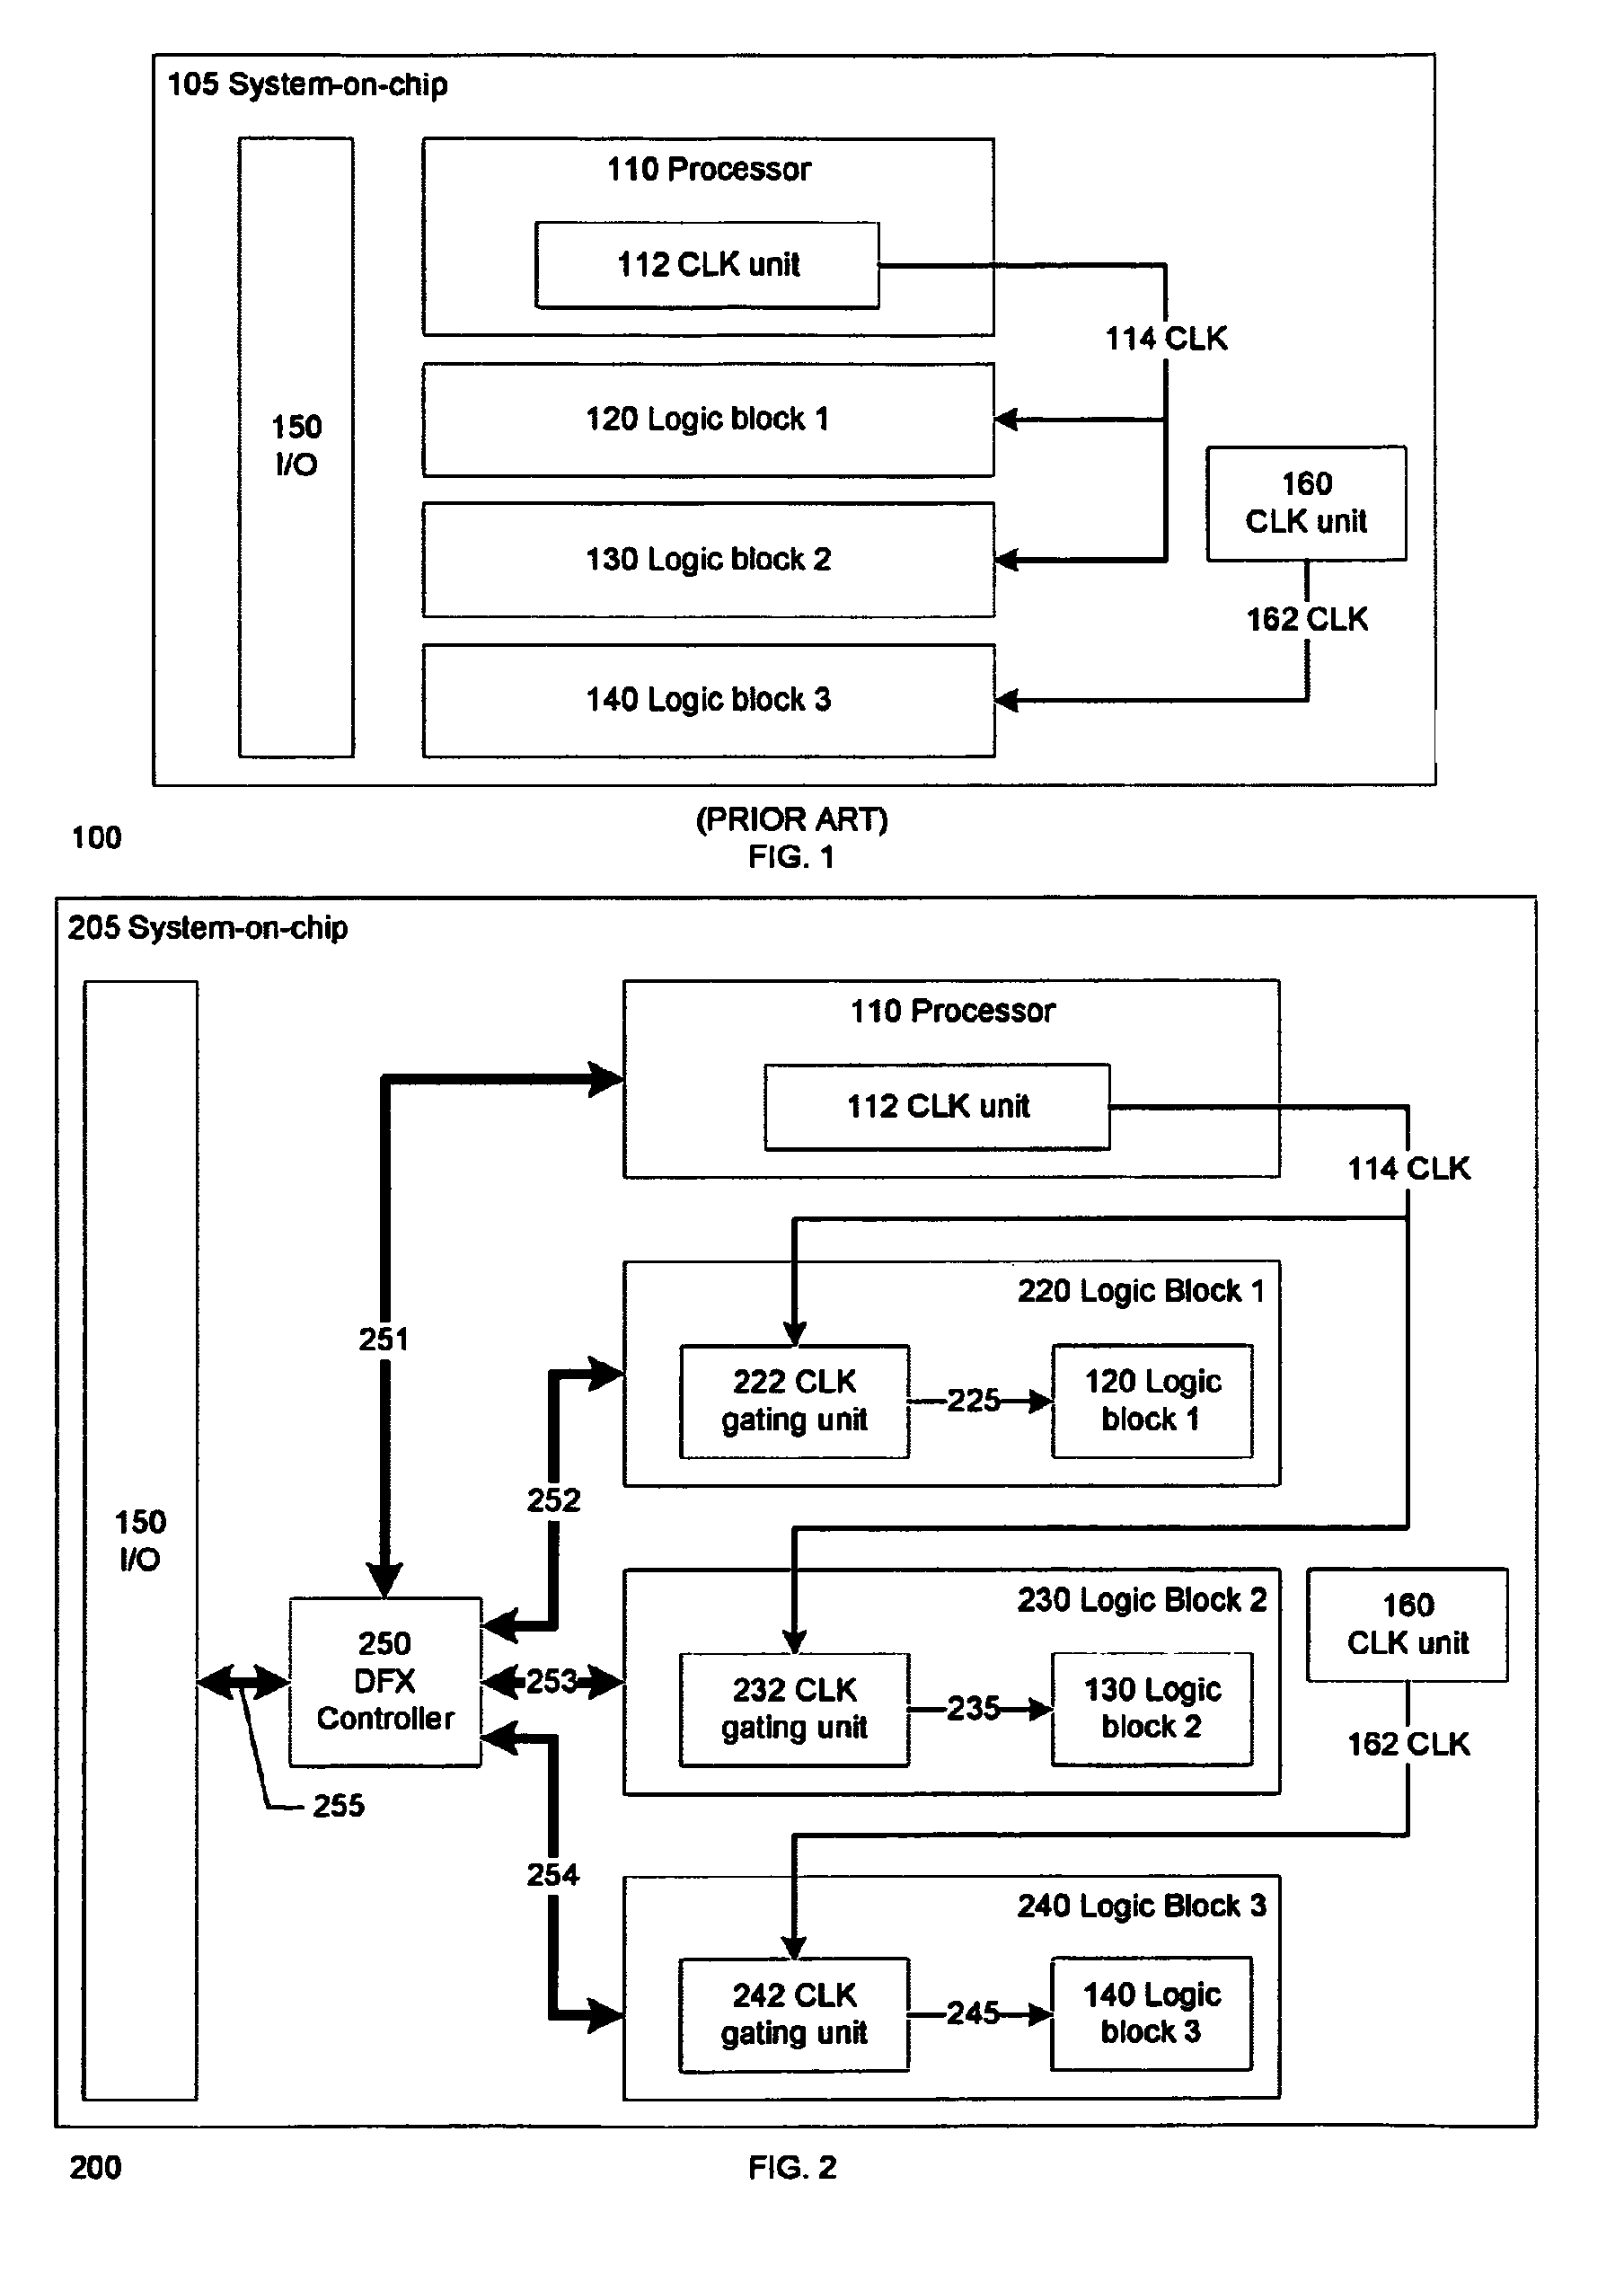 Scalable scan system for system-on-chip design